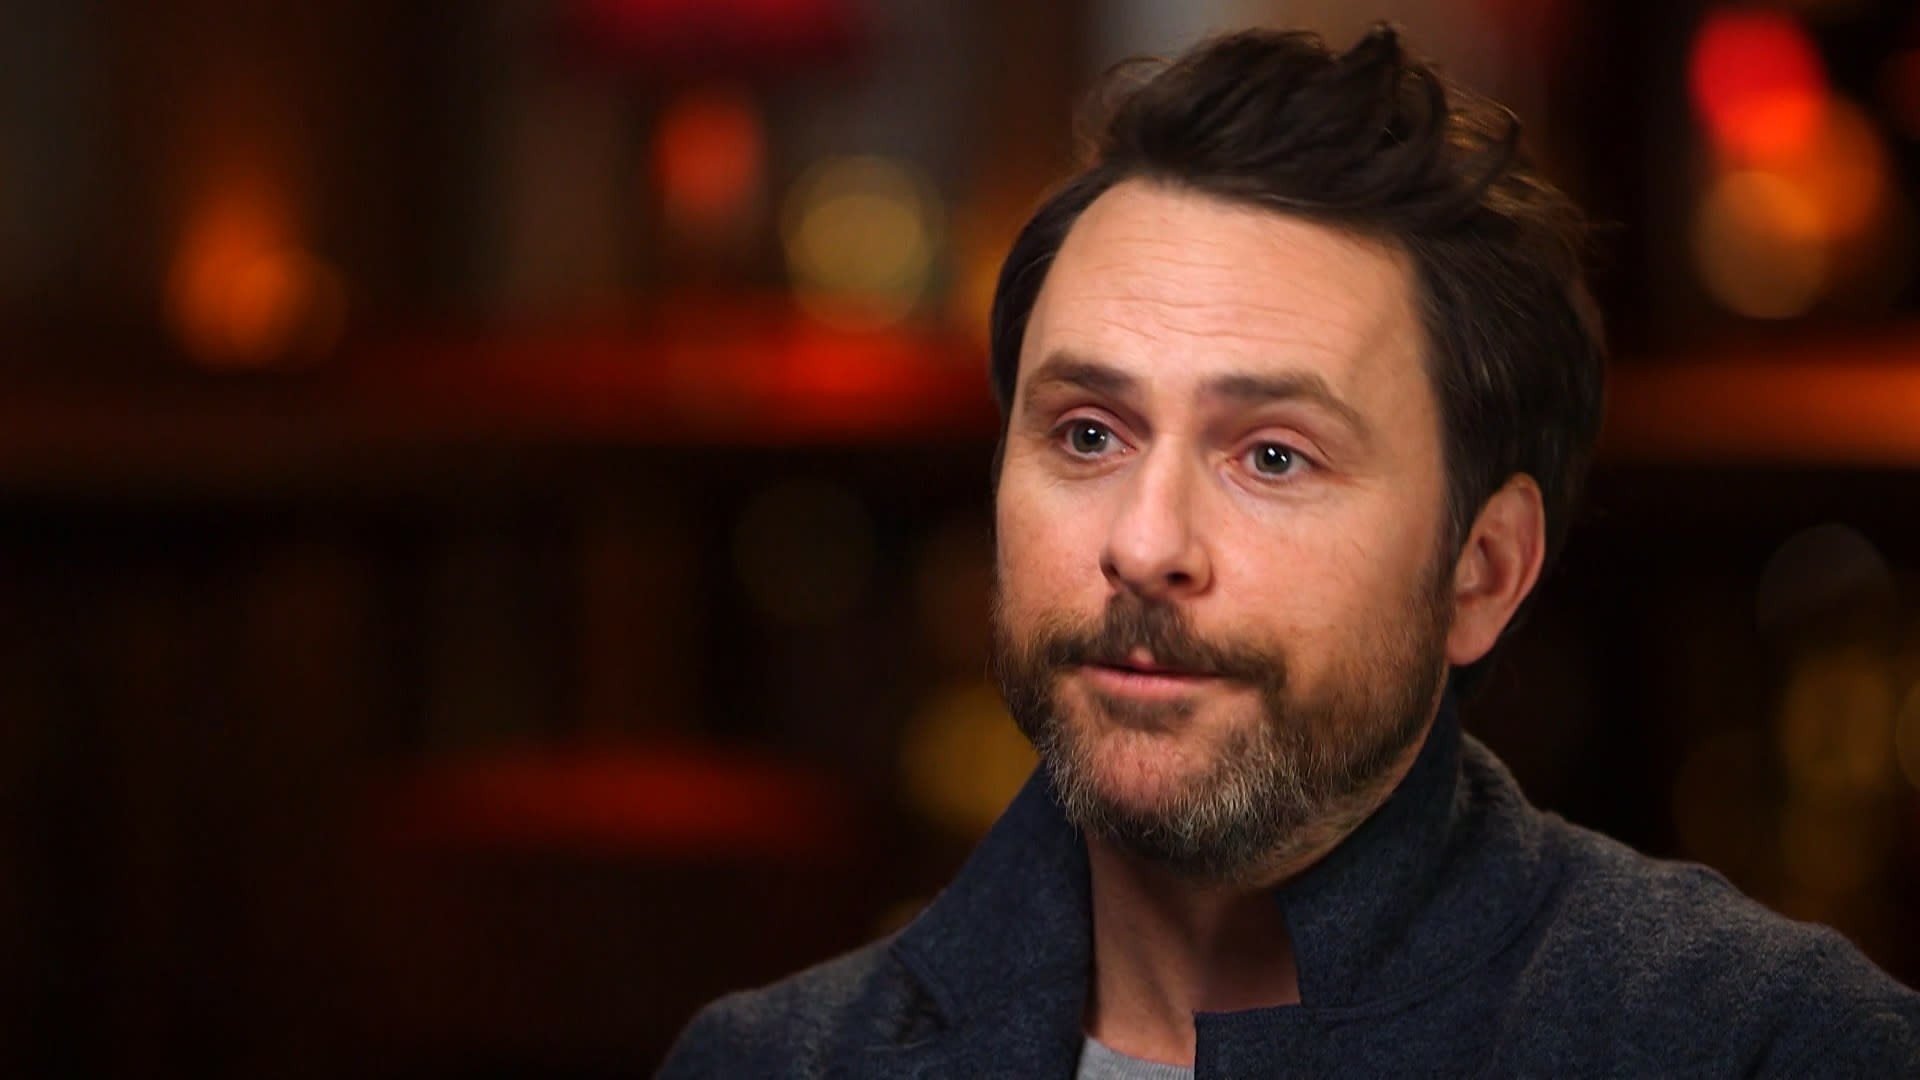 On This Day in RI History: February 9, 1976, Actor Charlie Day is